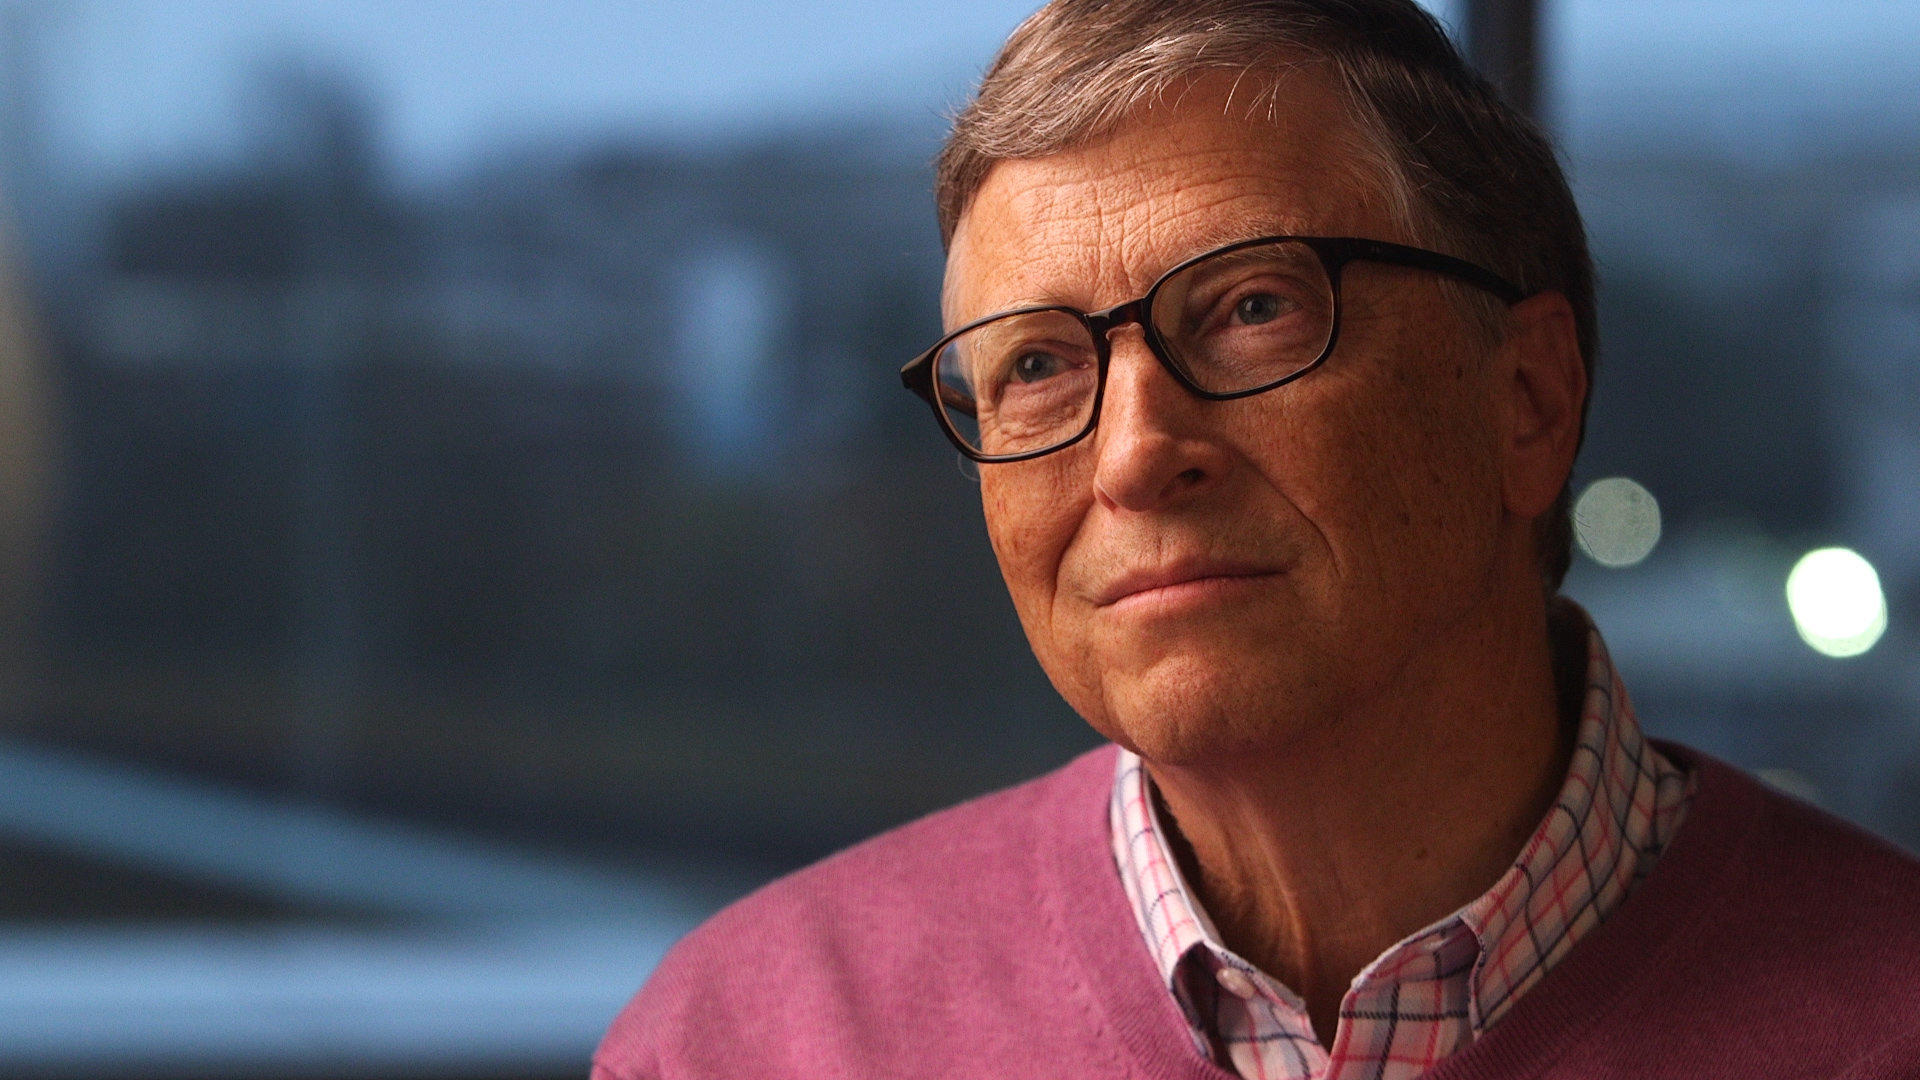 As of August 6, 2018, William Henry Gates III had a net worth of $95.4 billion, making him the second-richest person in the world, behind Jeff Bezos.